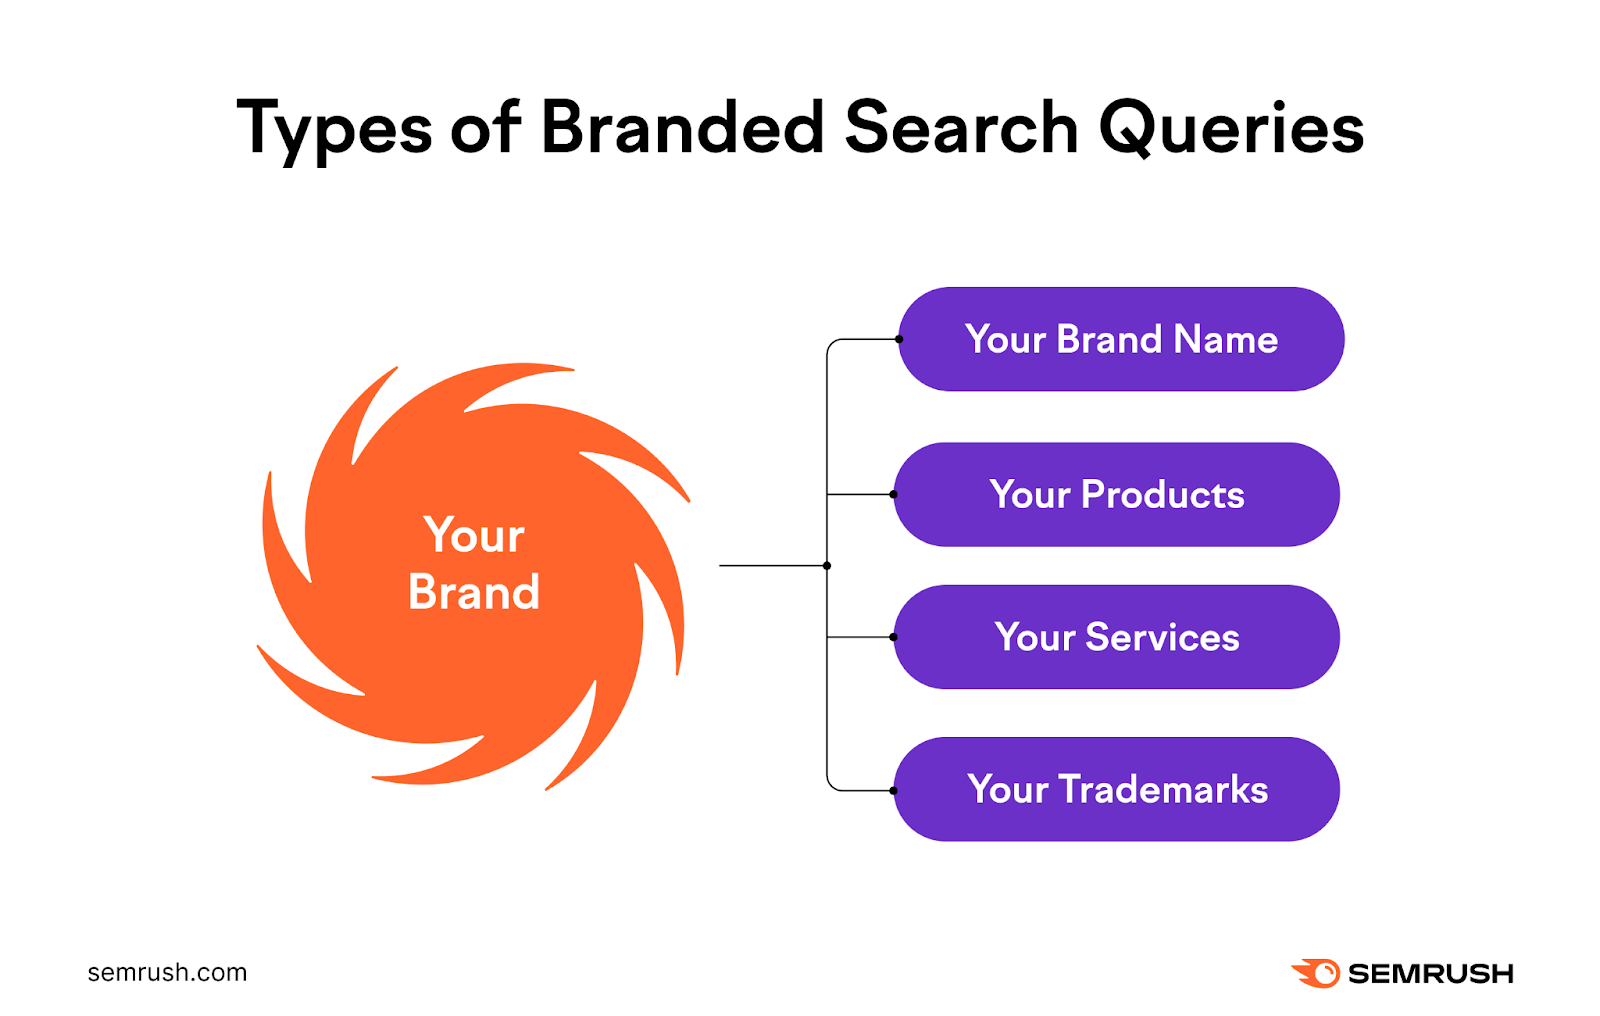 Types of branded search queries include your brand name, products, services and trademarks